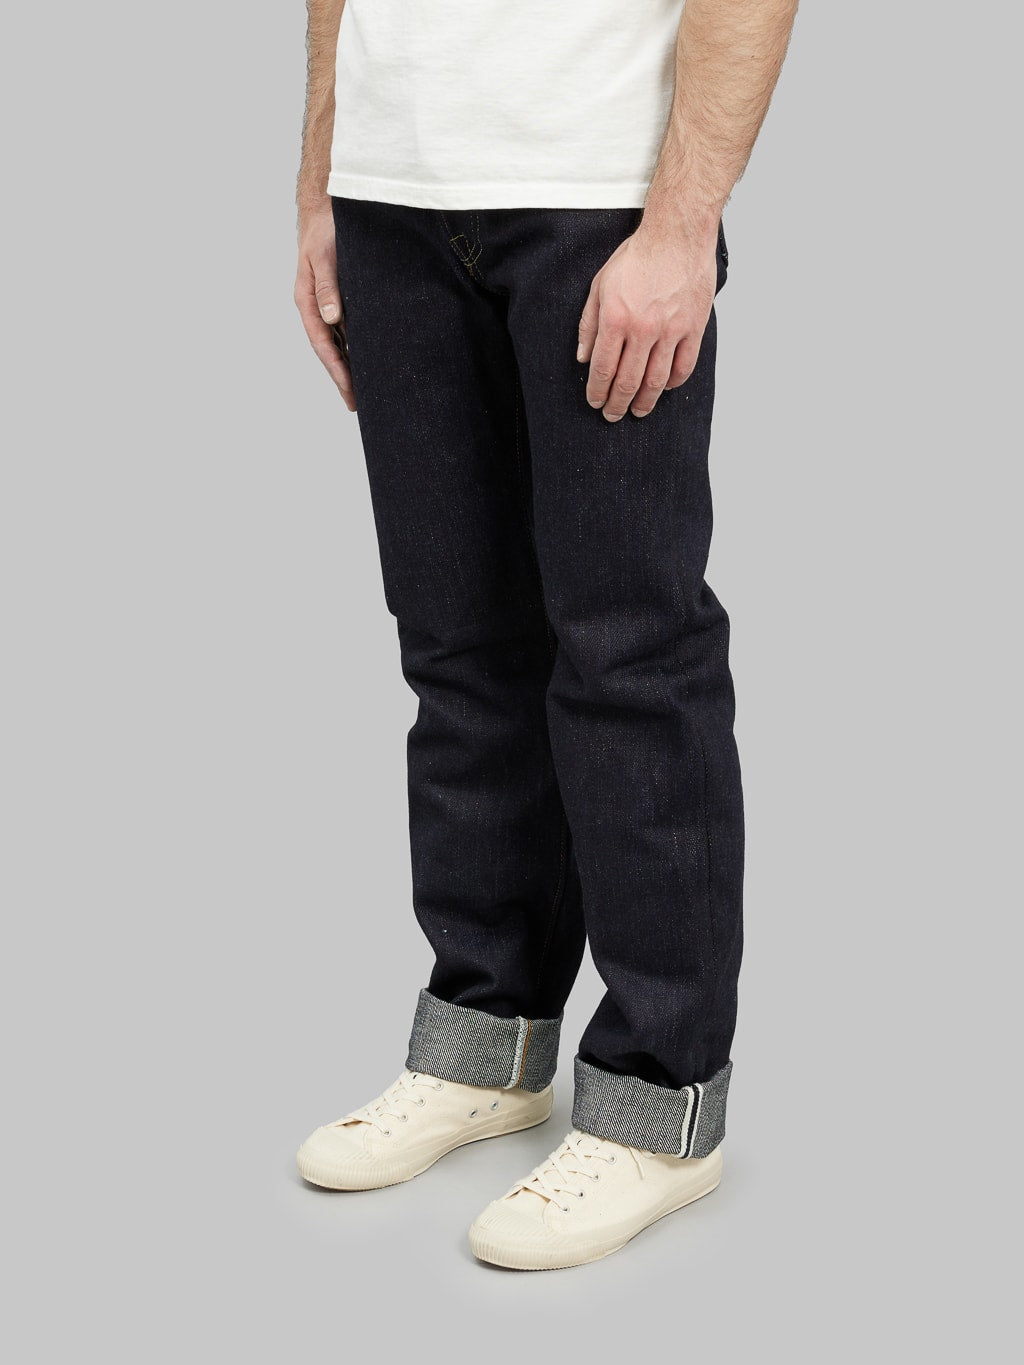 The Strike Gold Extra Heavyweight regular straight jeans side view